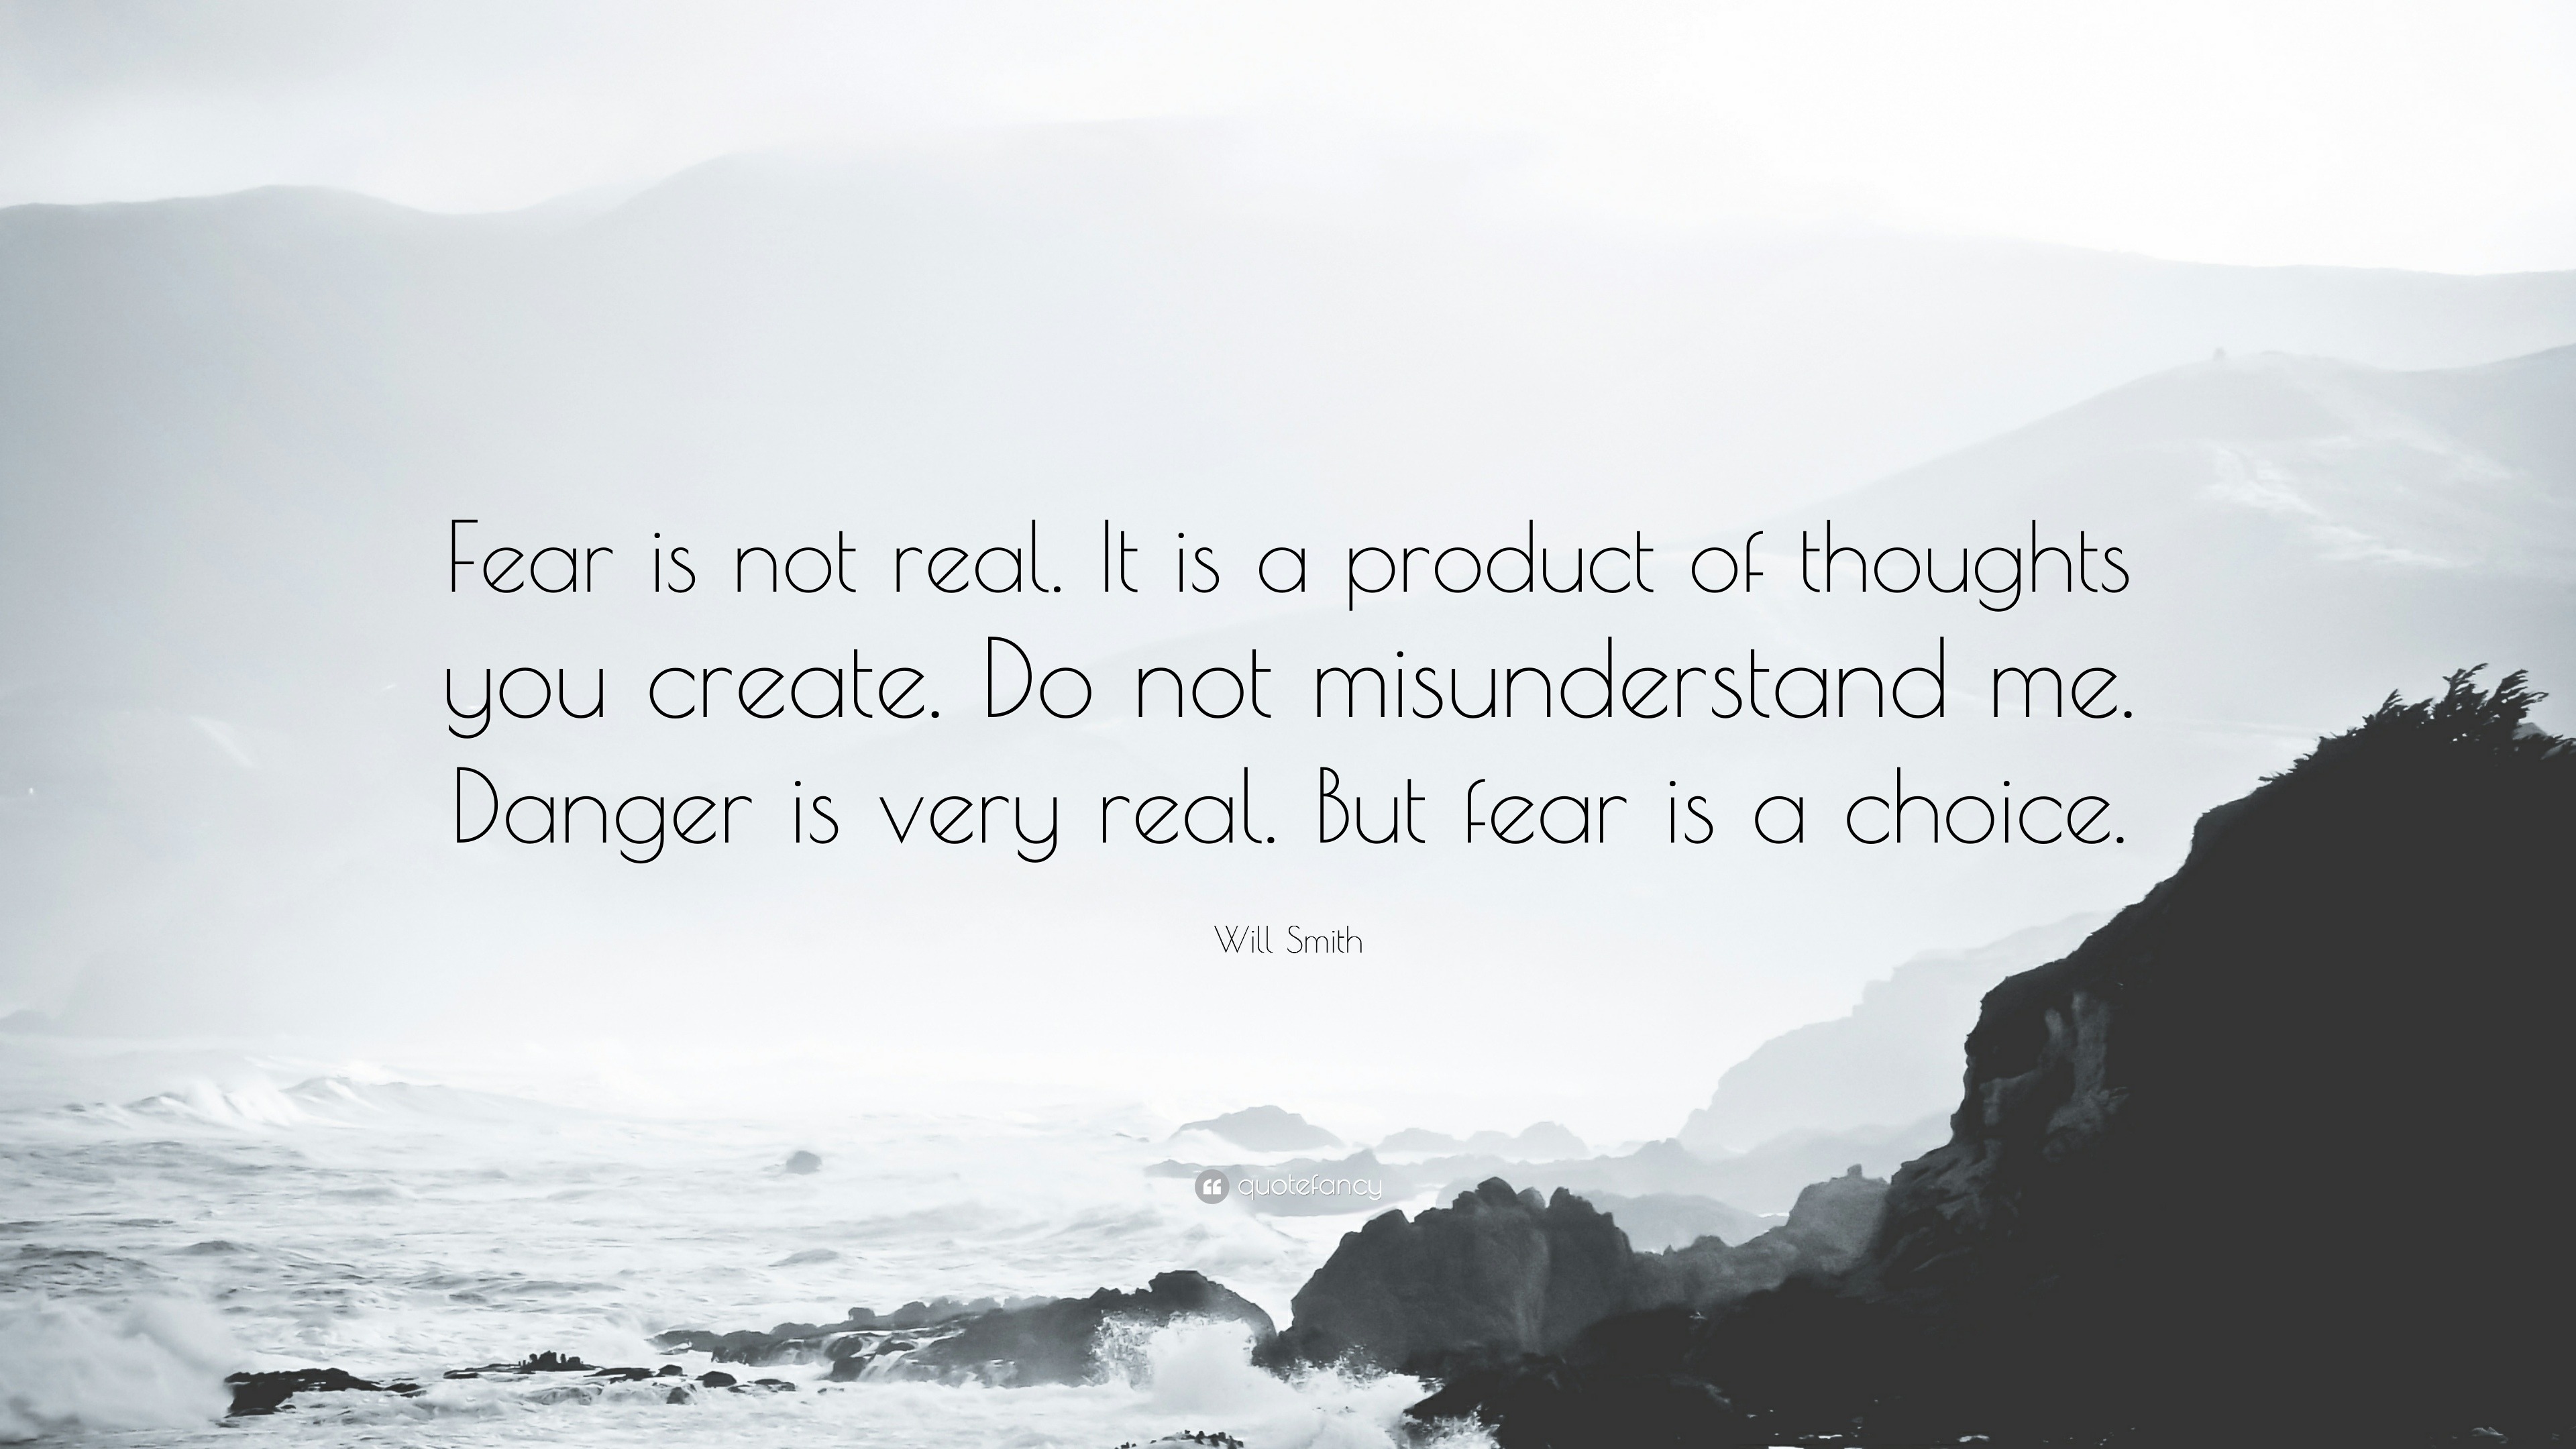 Will Smith Quote “Fear is not real. It is a product of